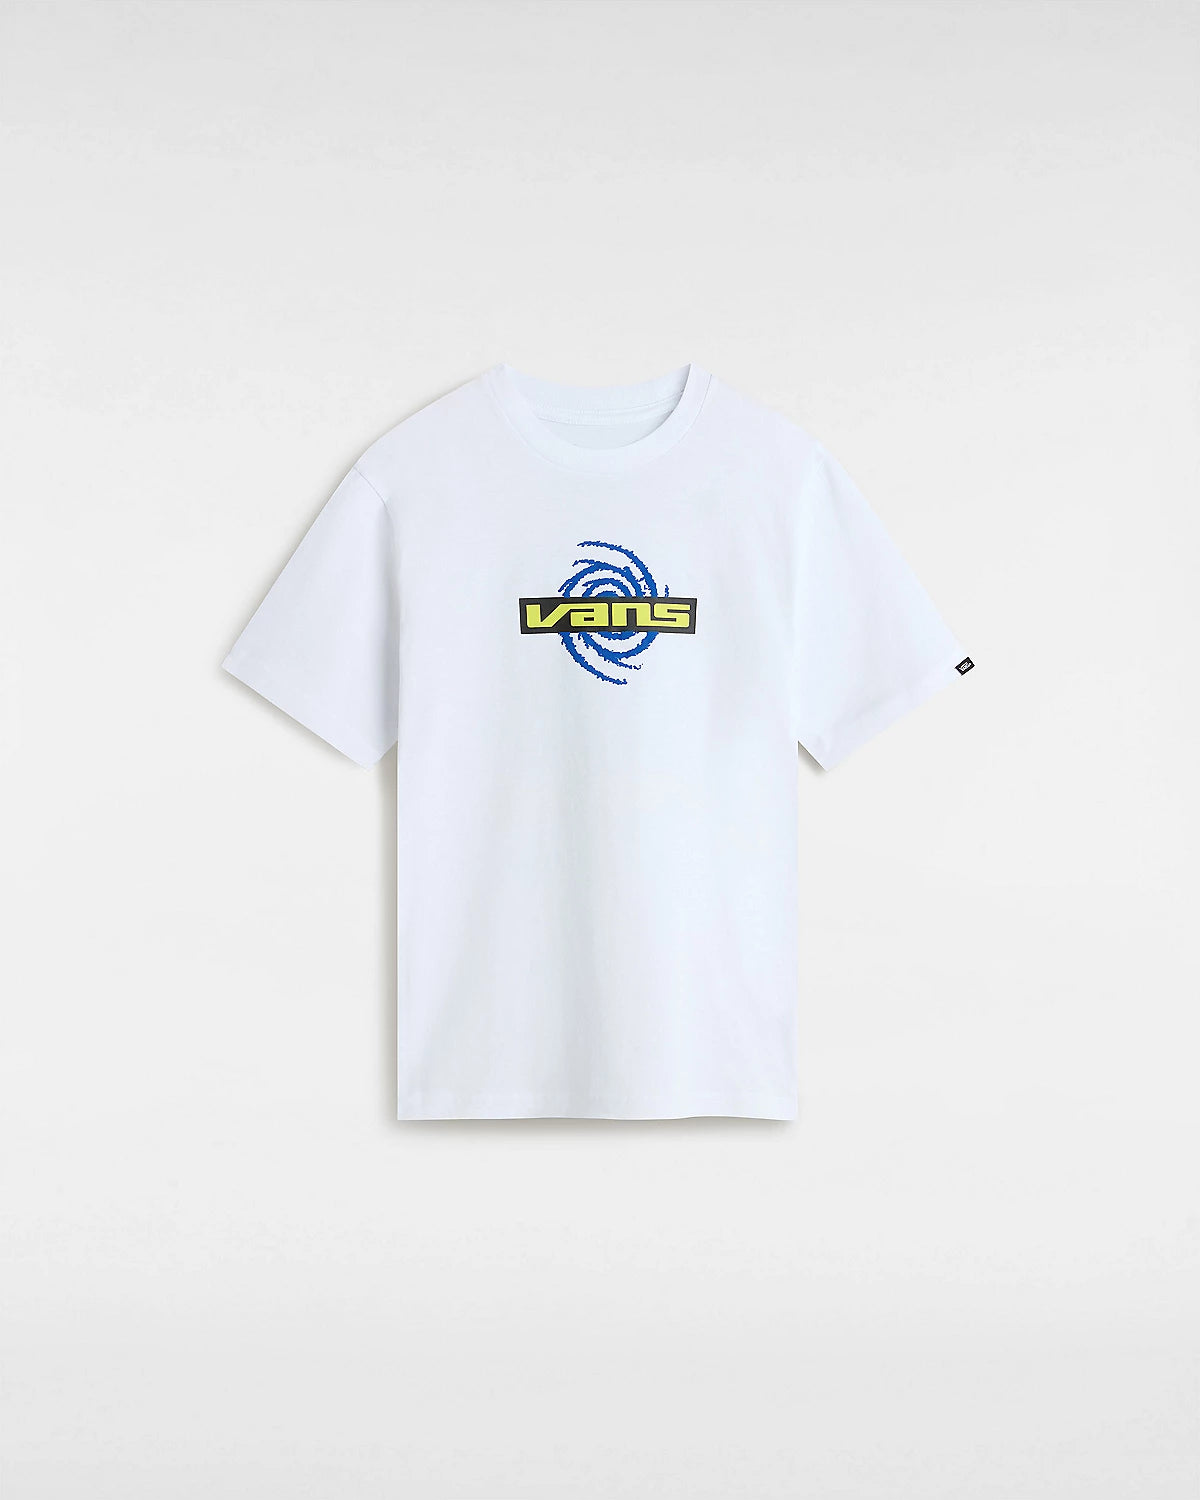 VANS - GALAXY SS YOUTH TEE - WHITE